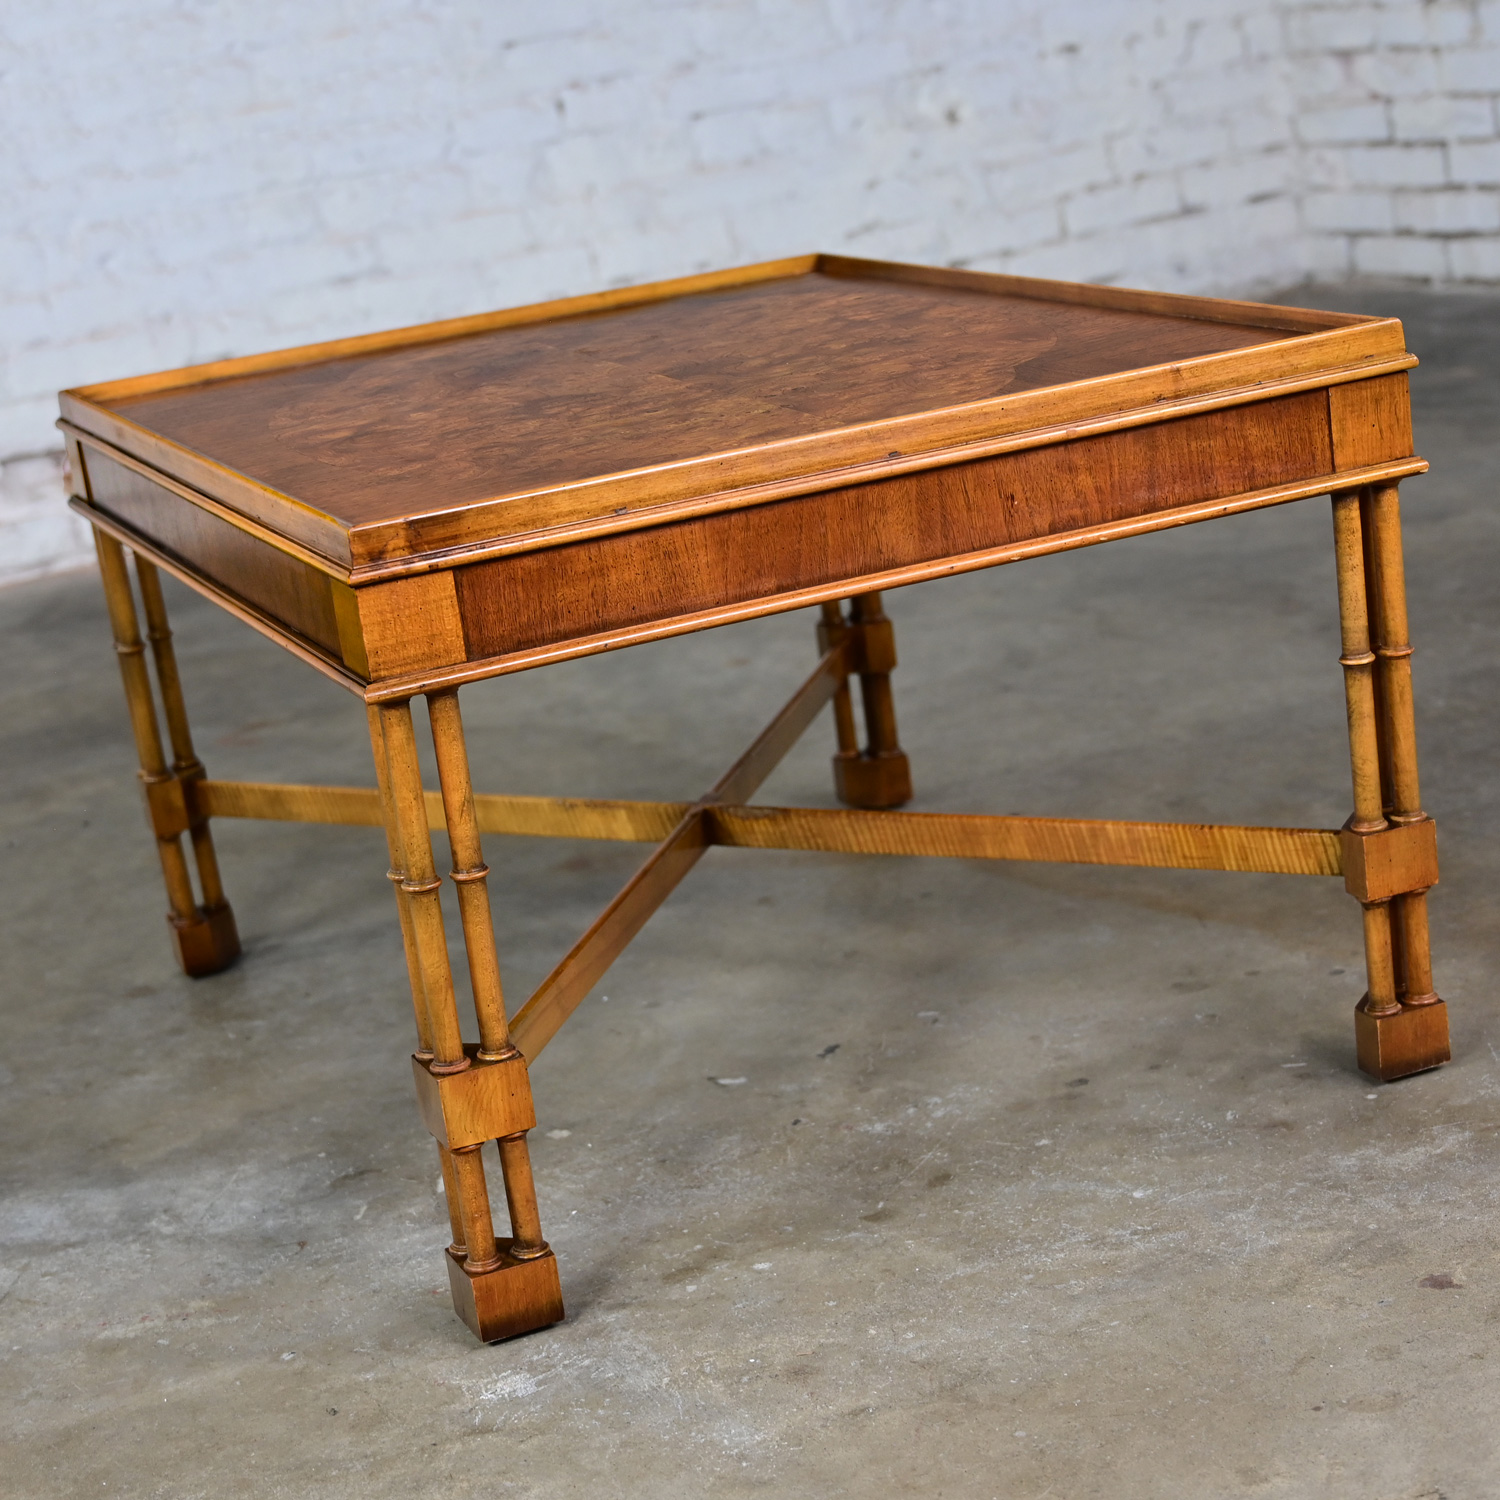 Mid-Late 20th Century Baker Furniture Campaign Style Rectangular End Table Walnut & Mahogany Faux Bamboo Legs